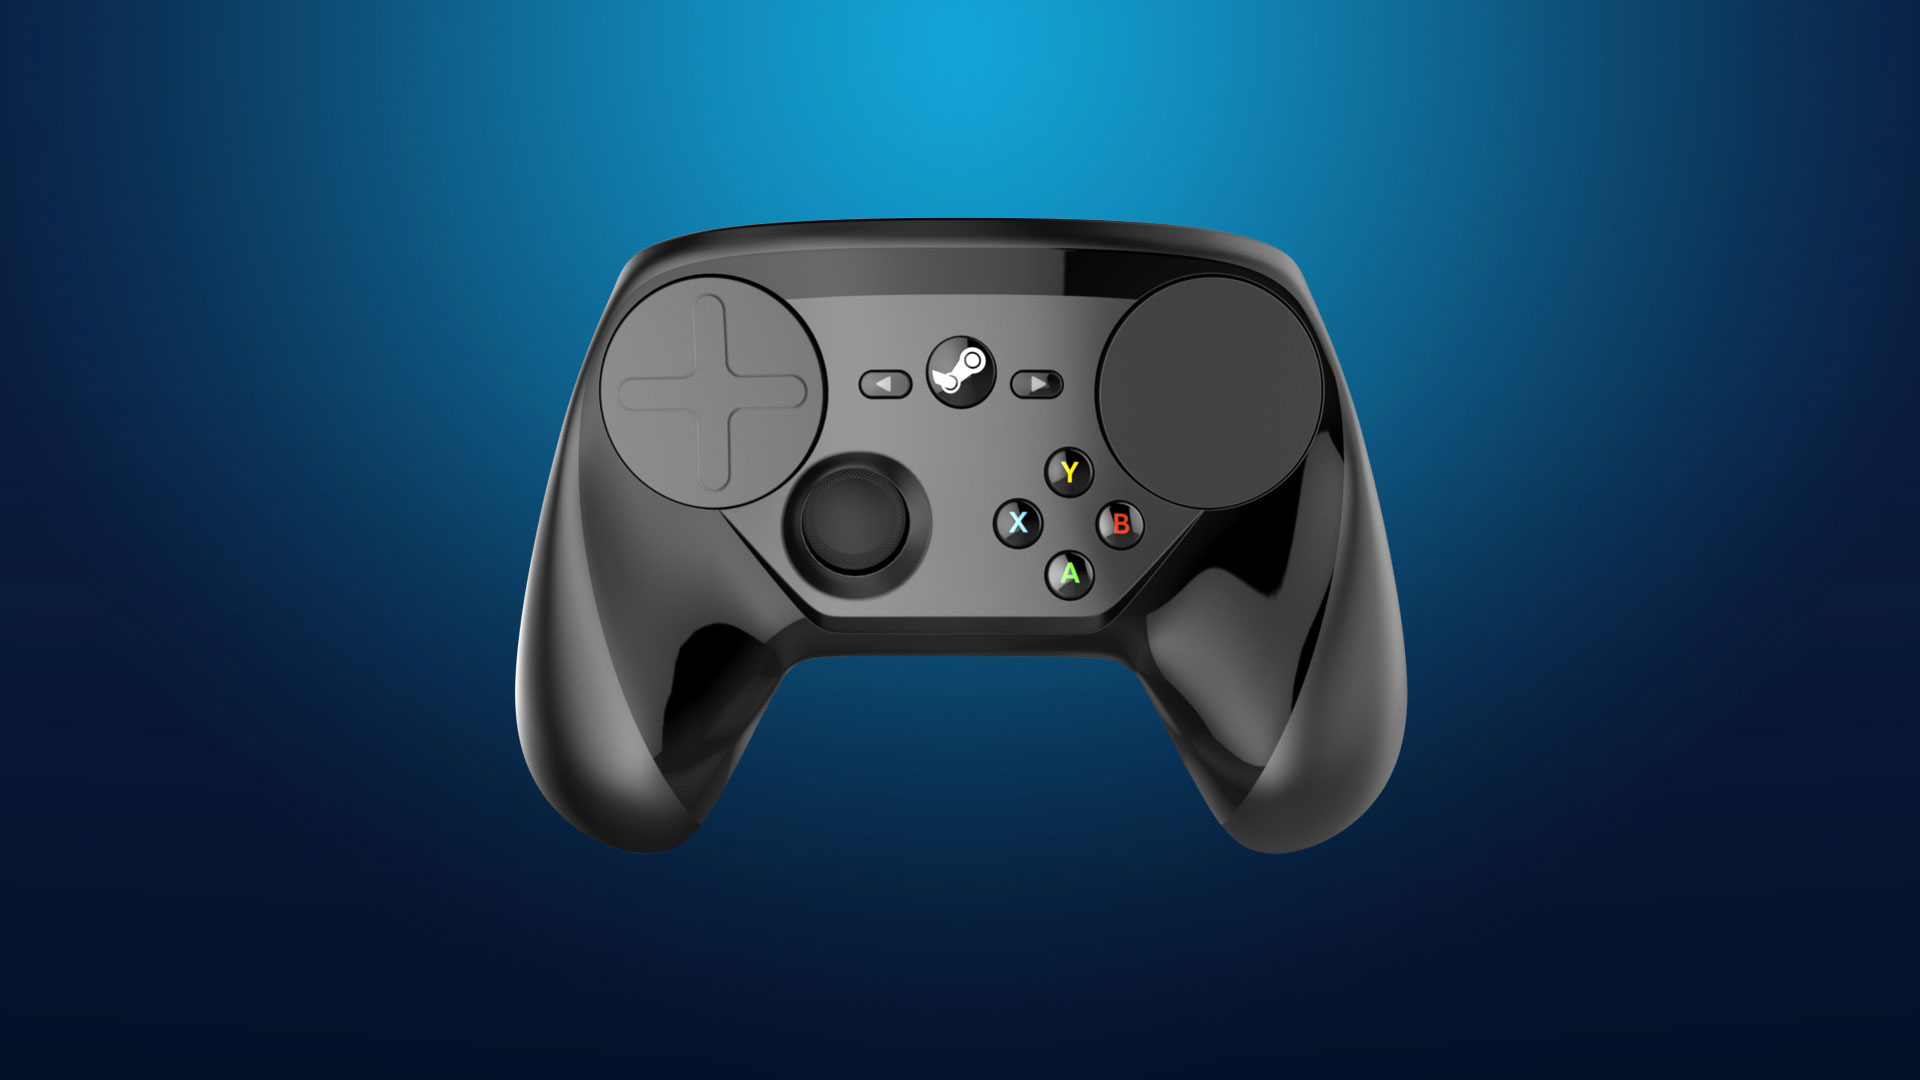  Judge denies Valve's request for a new trial following Steam Controller lawsuit loss 